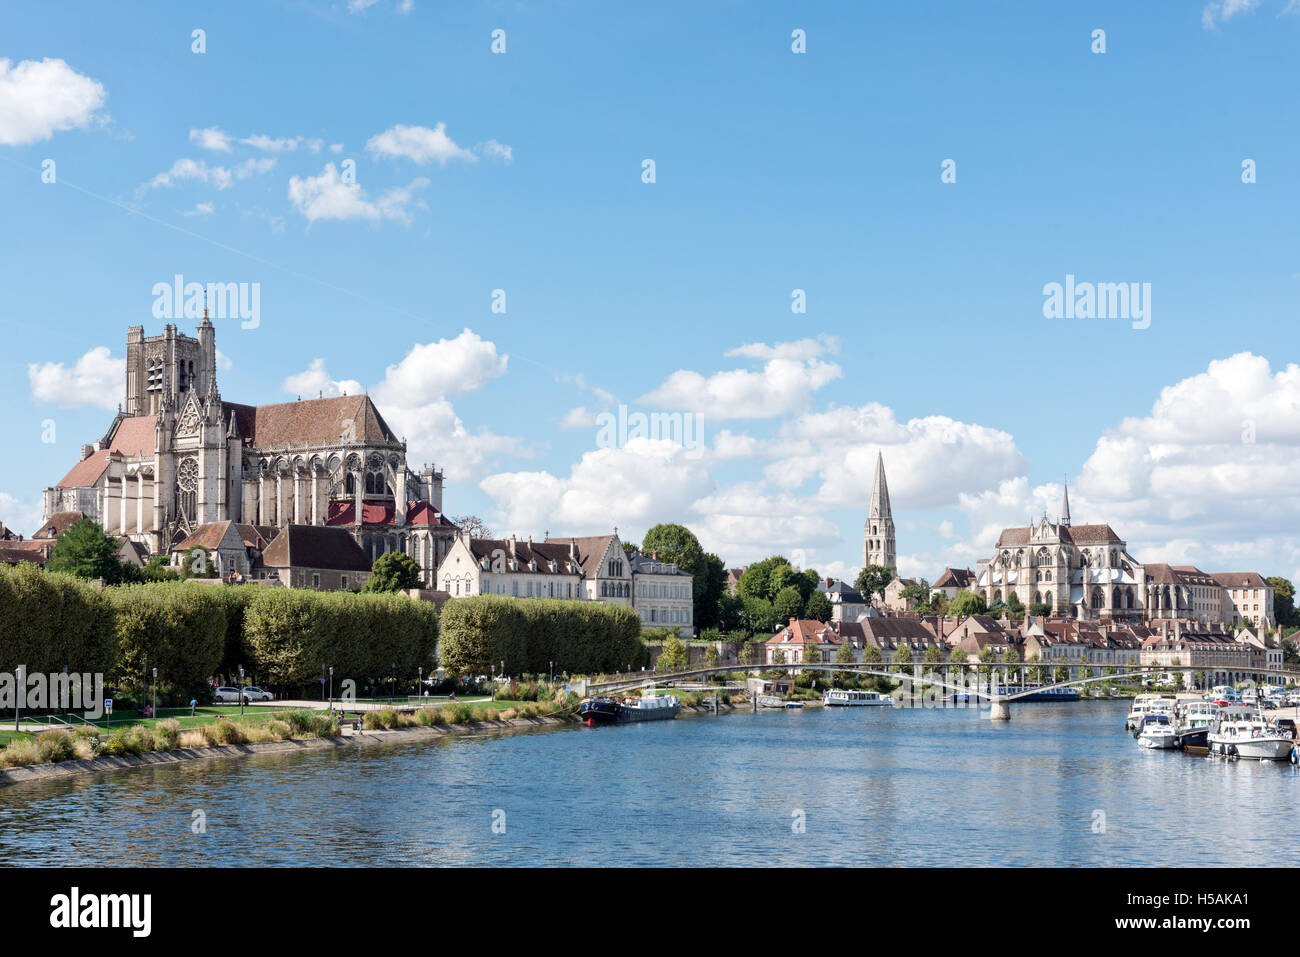 A view of the town of Auxerre showing the Cathedral of Saint Etienne & the Abbey st Germain from across the river Yonne Stock Photo